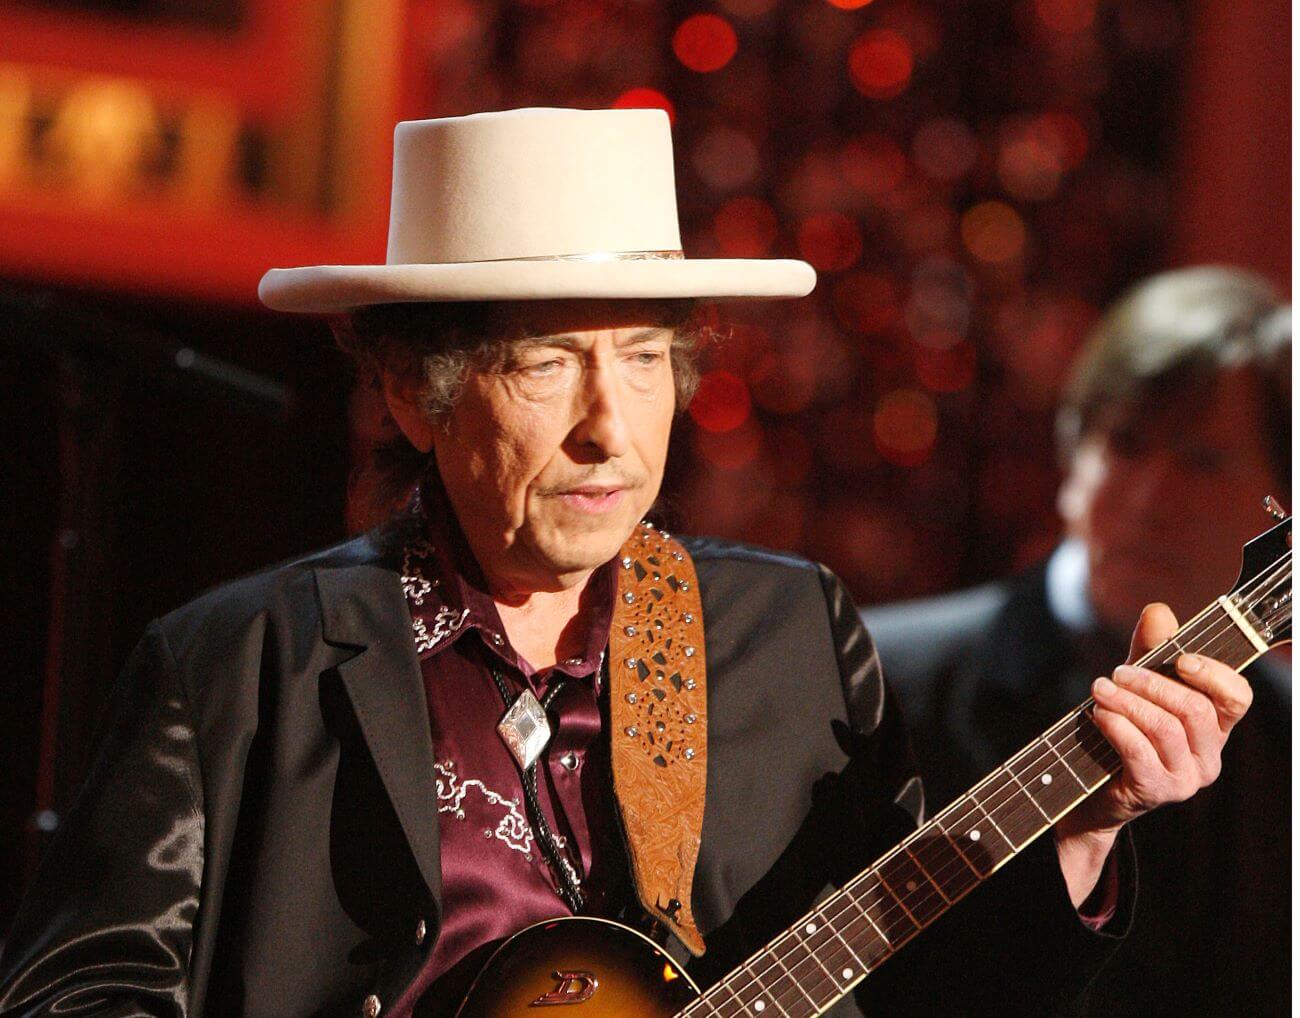 Bob Dylan wears a white hat and plays the guitar.